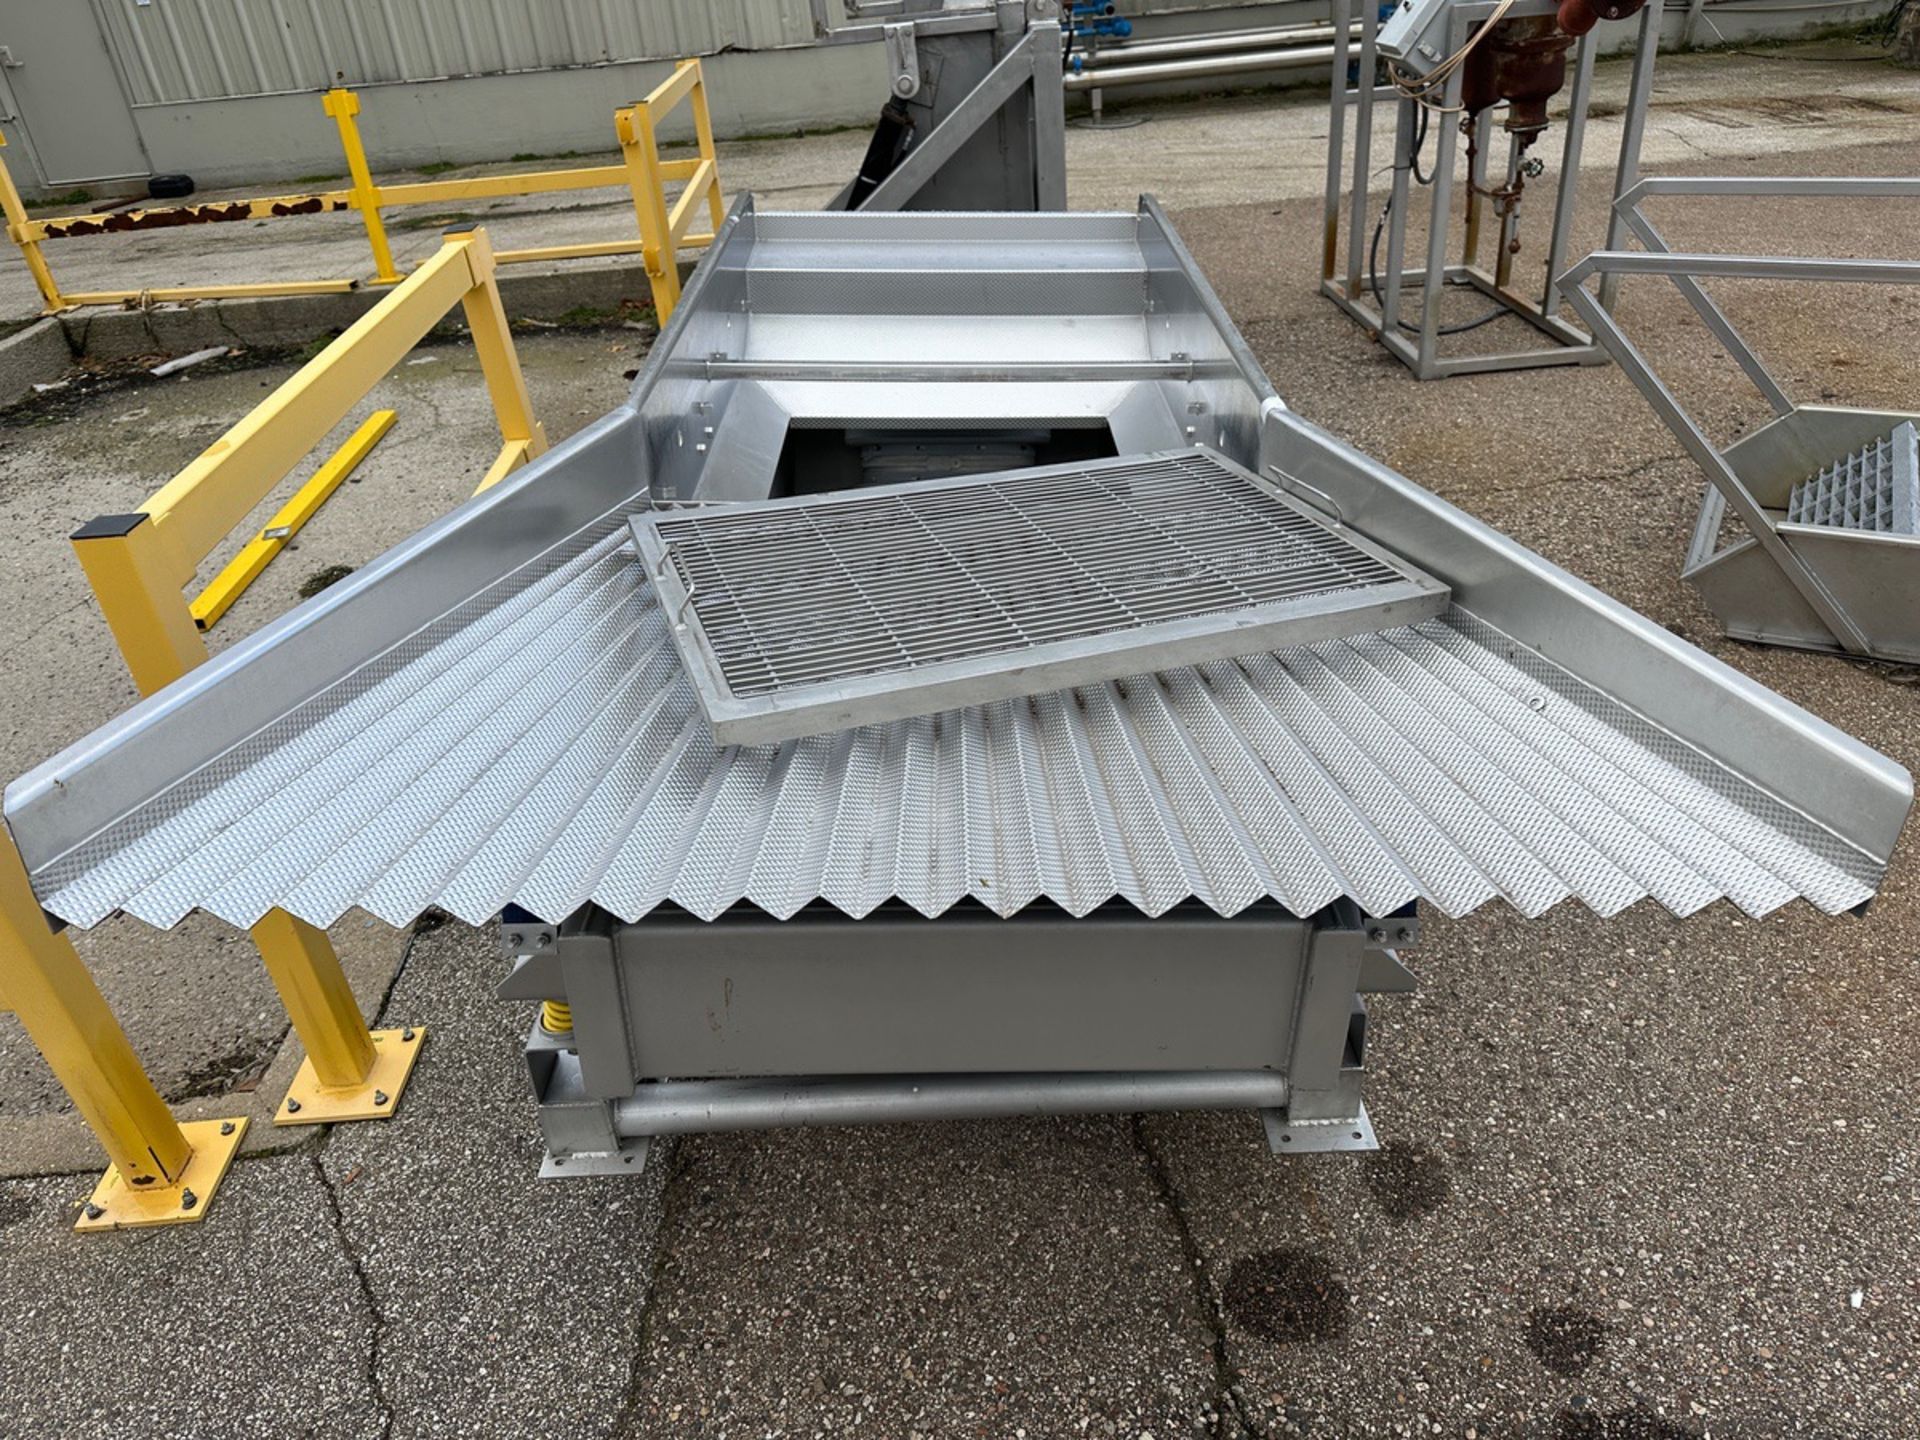 Key Iso-Flo Model 434795-1 Vibratory Conveyor with Fanned Exit (Approx. | Rig Fee $300 - Image 2 of 5